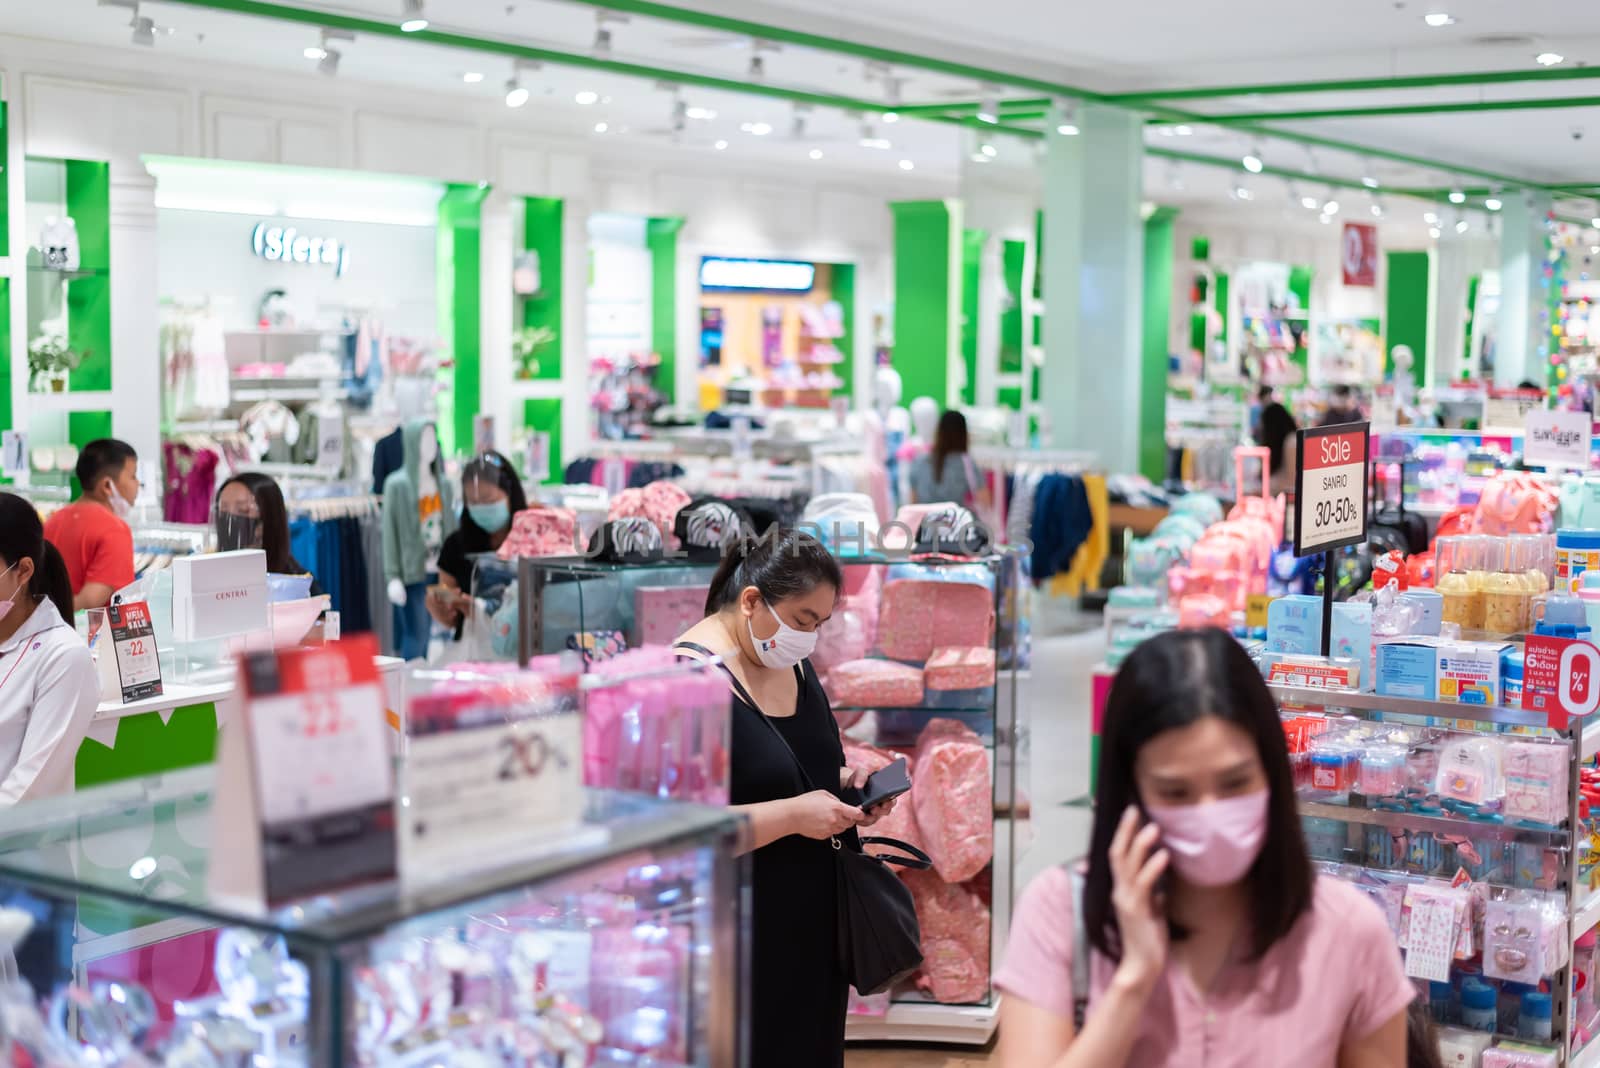 Editorial: Central Bangna Bangkok City, Thailand, 6th Jun 2020. Asian people shopping in the clothing store after opening lockdown with mask and social distancing.